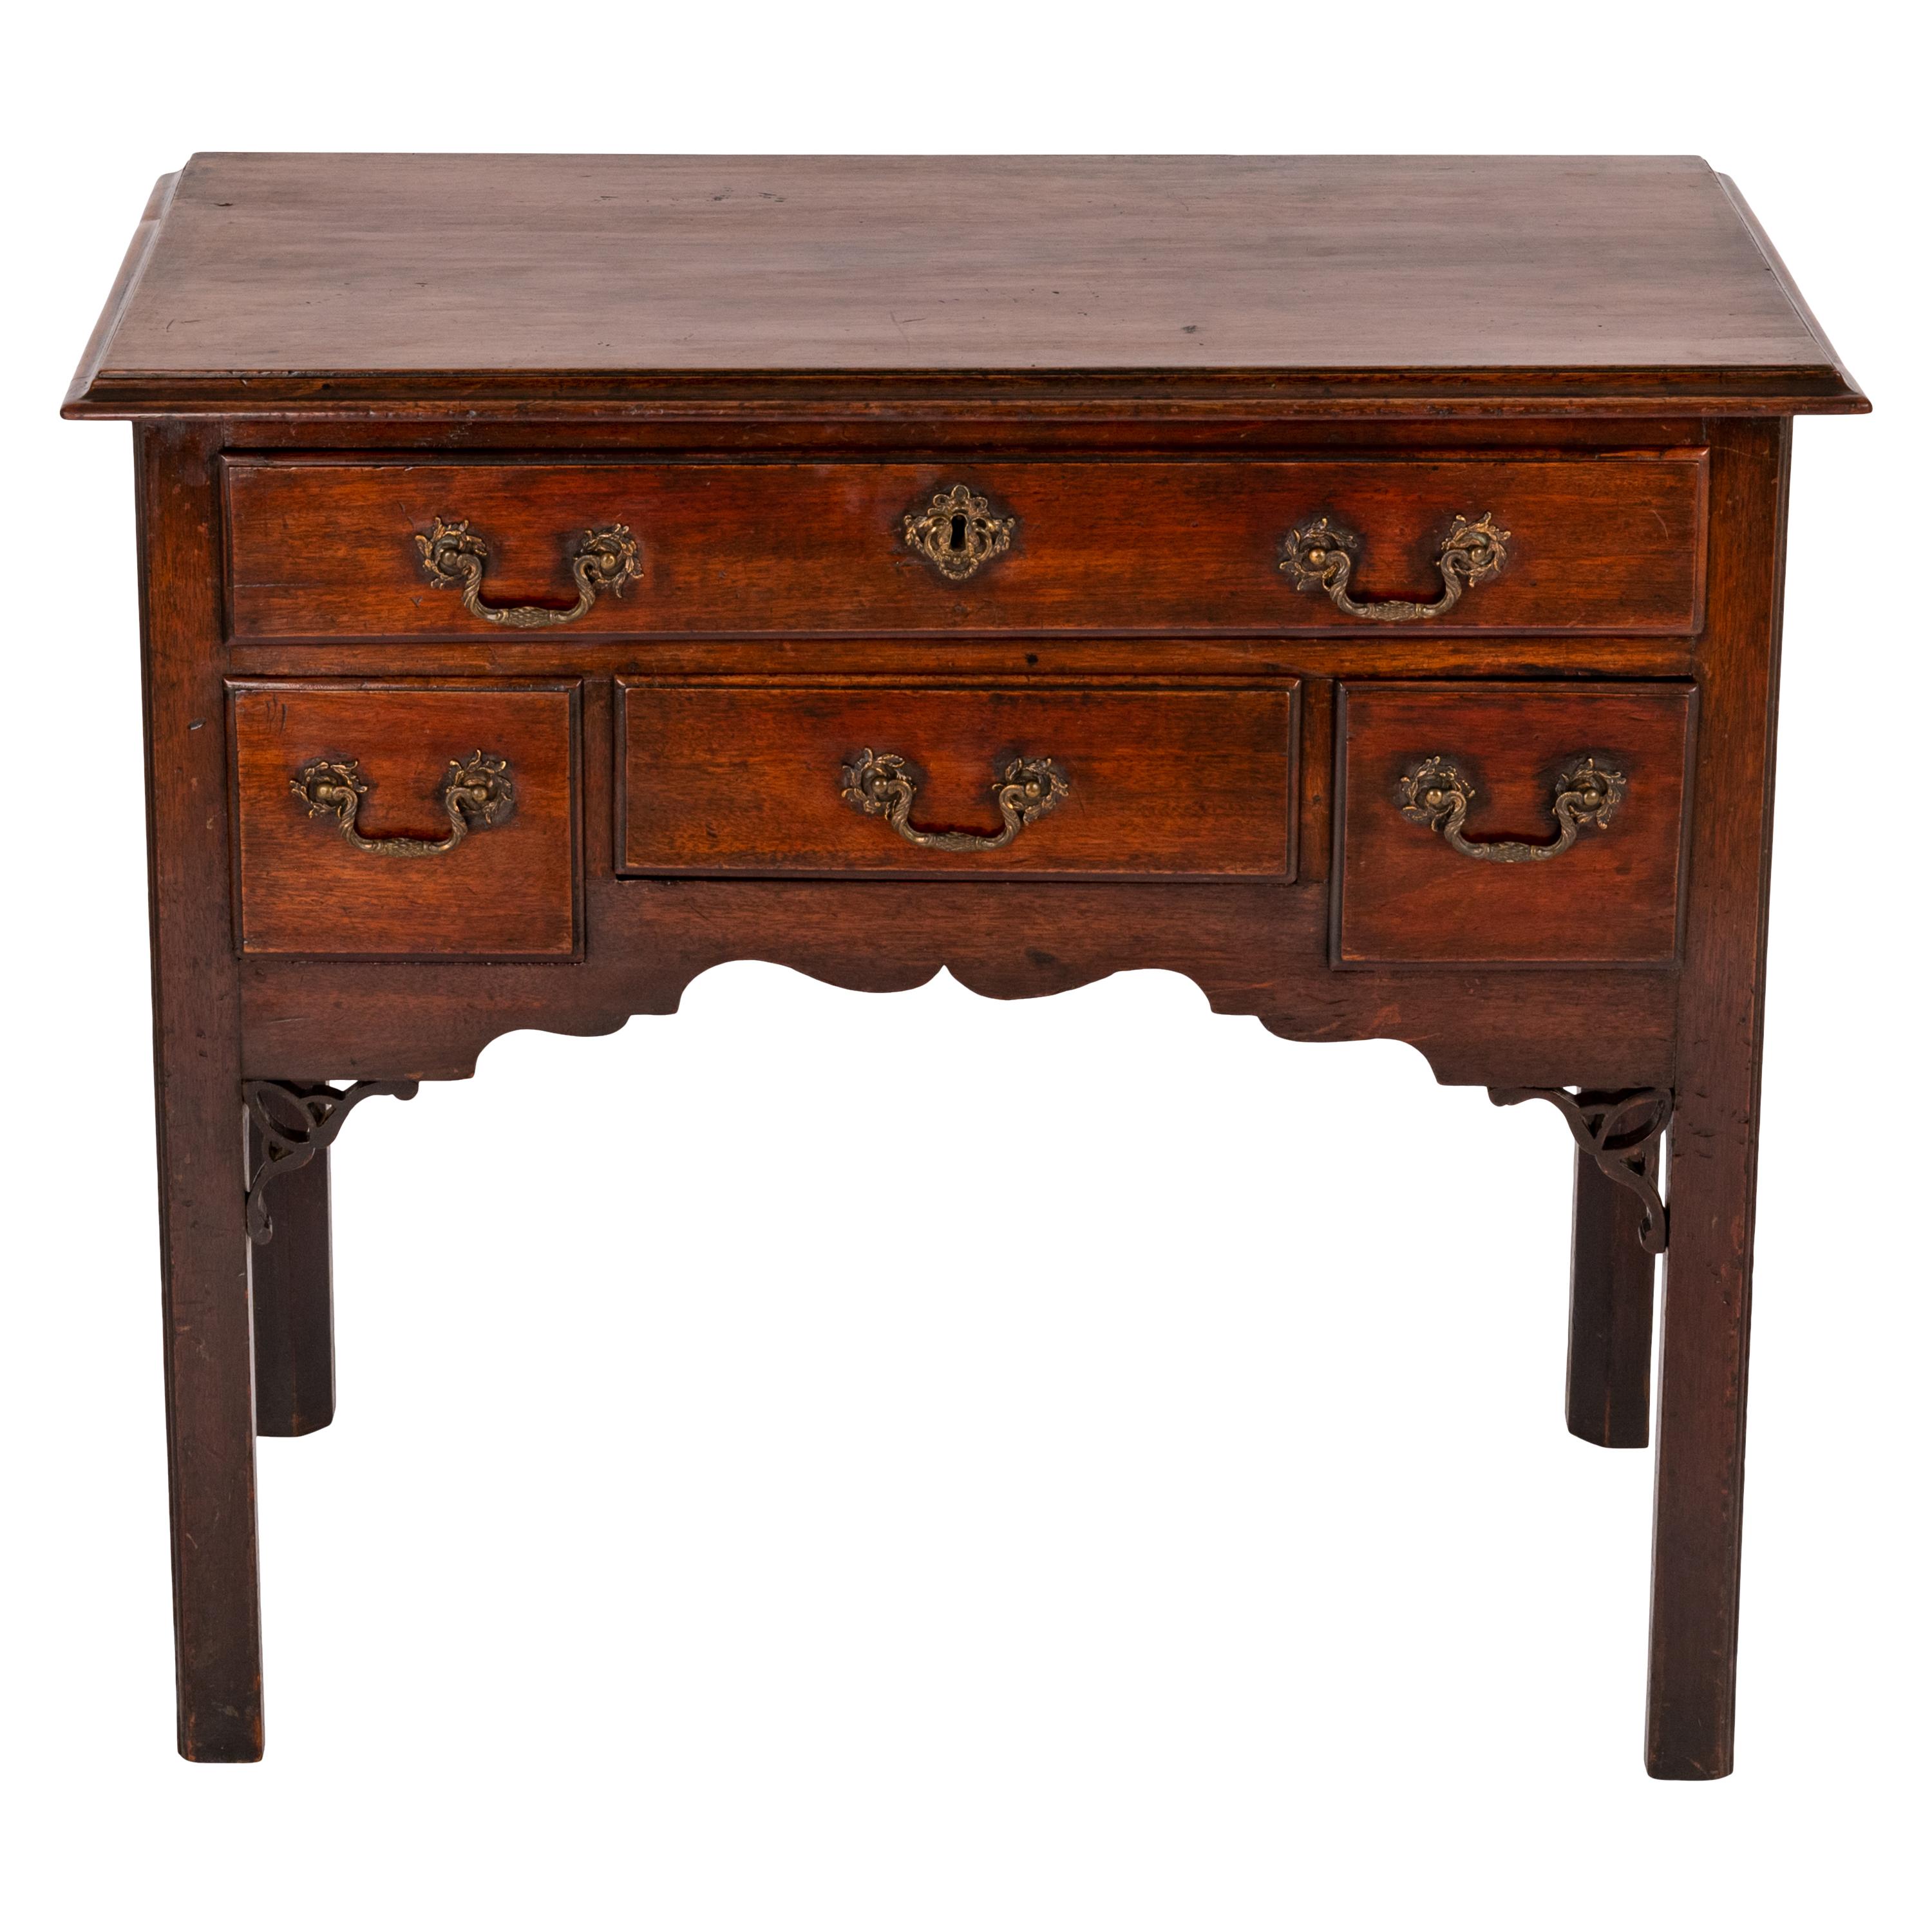 Antique English 18th C Georgian Mahogany Chippendale Lowboy Side Table 1750 For Sale 3